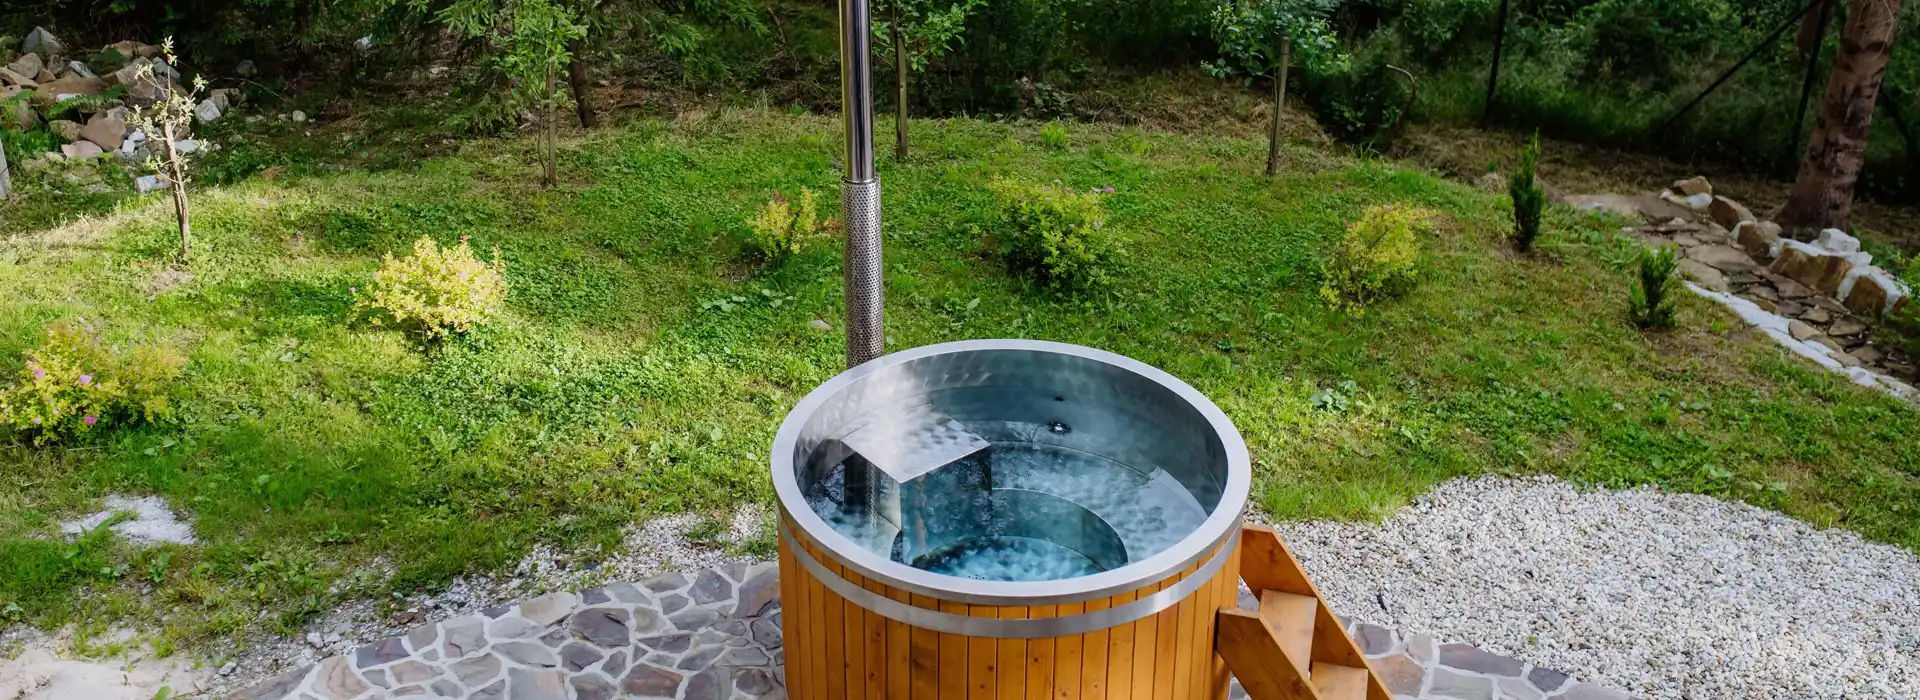 Dumfries camping and glamping pods with hot tubs